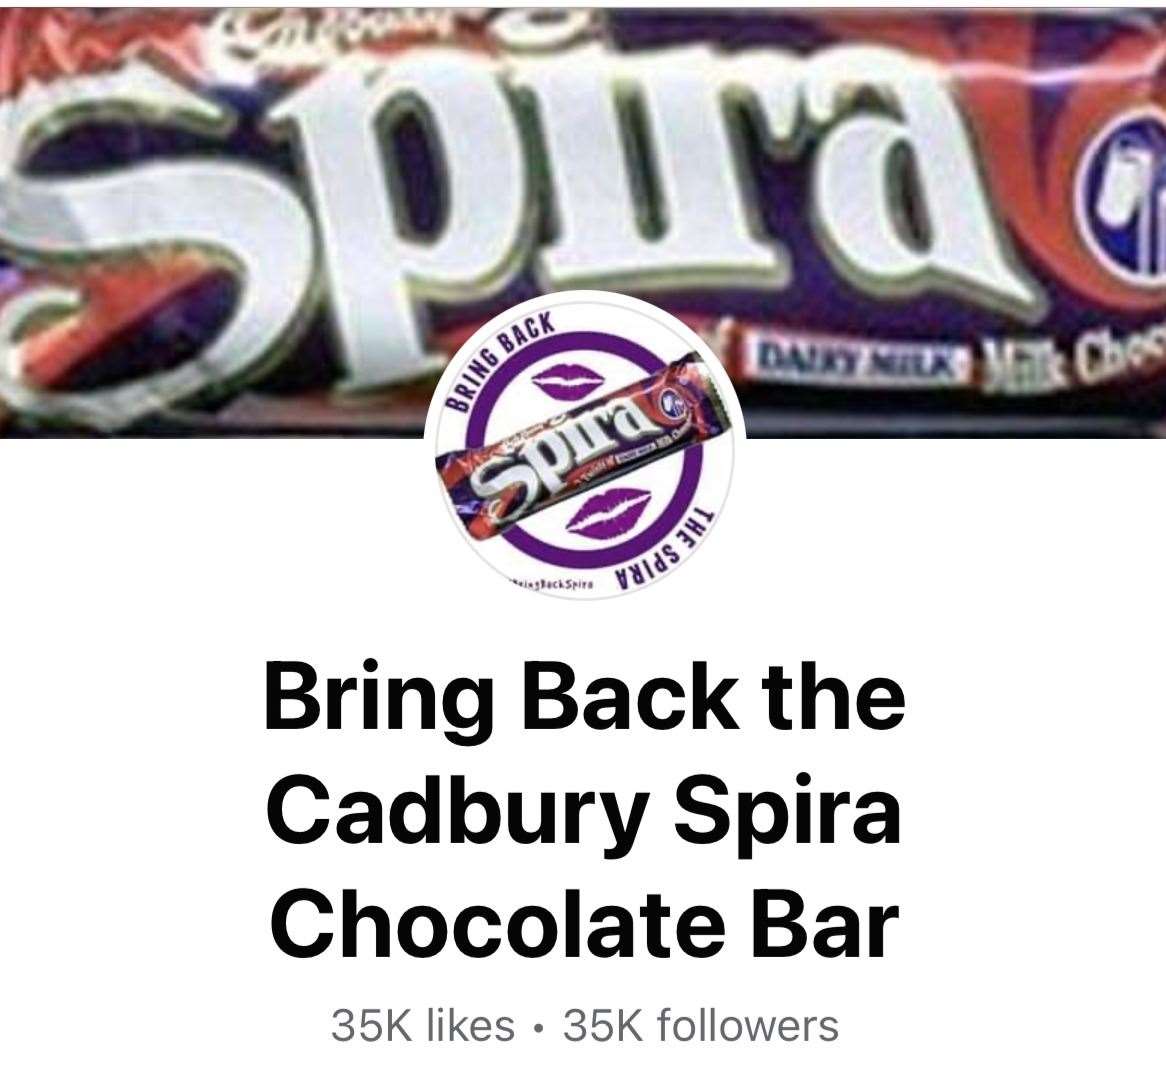 There have been campaigns to bring the Spira back, including this one attracting 35,000 Facebook followers